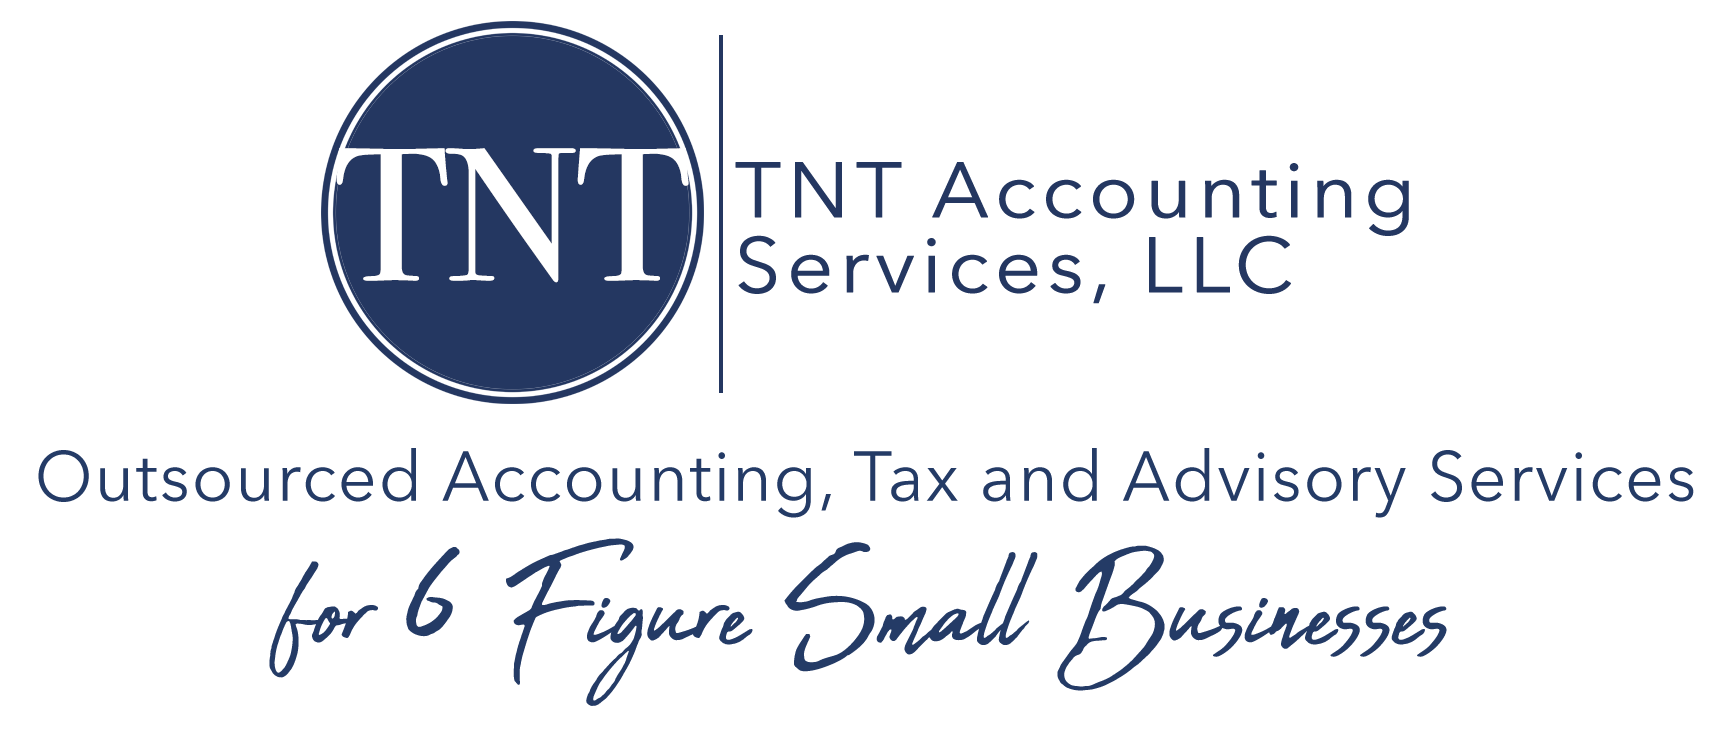 TNT Accounting Services, LLC